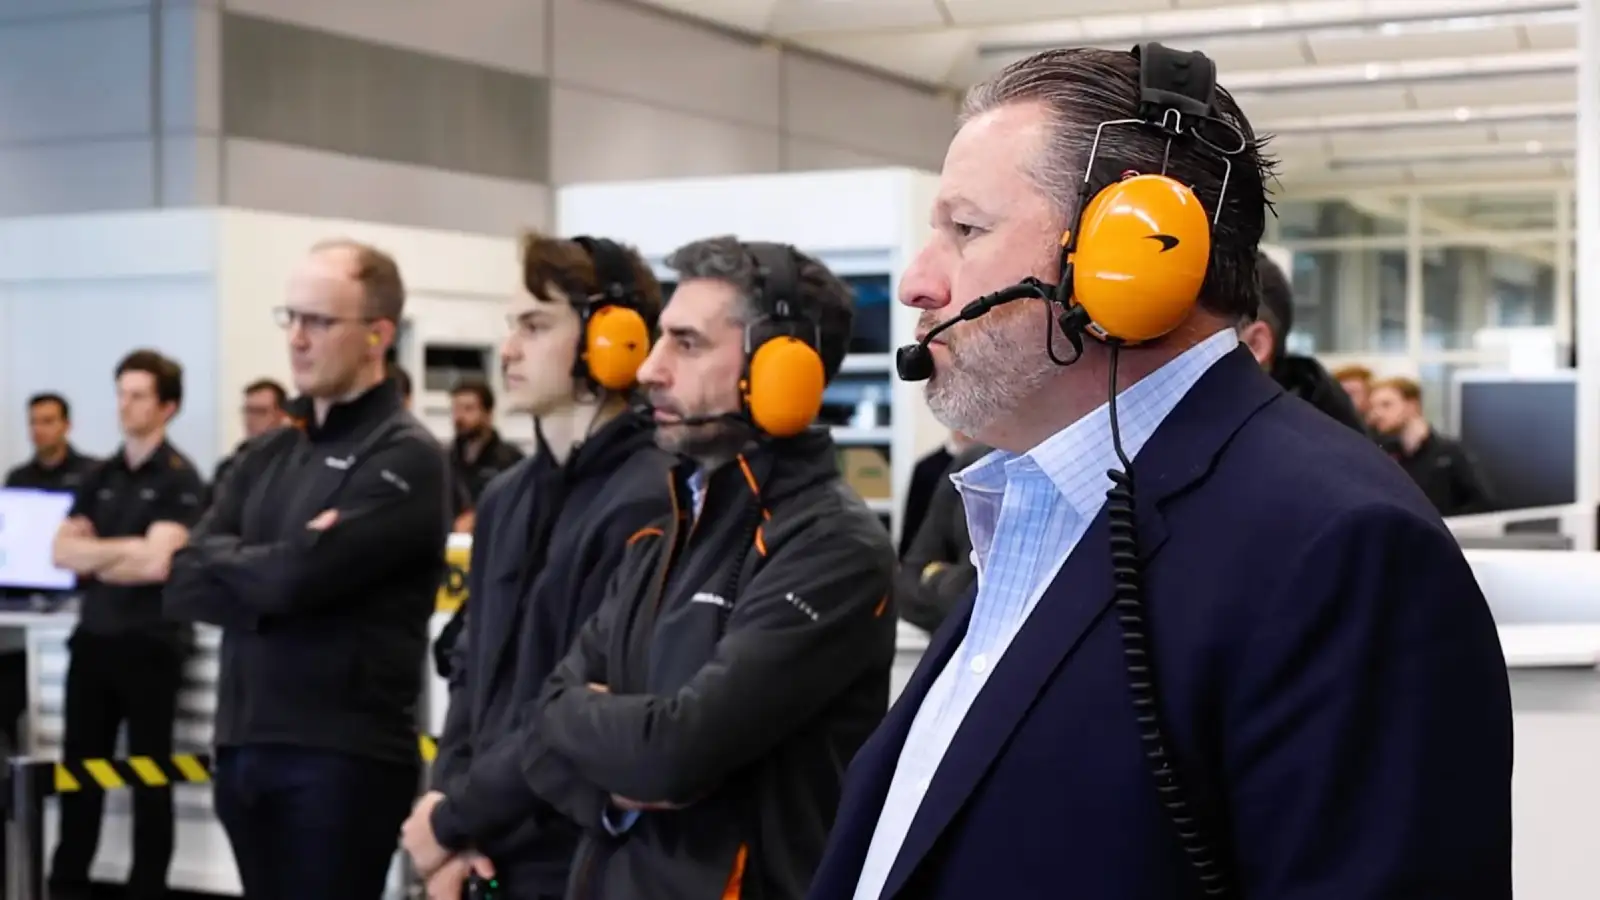 Zak Brown, Andrea Stella and Oscar Piastri watch on as the 2023 McLaren car is fired up. Woking, January 2023.